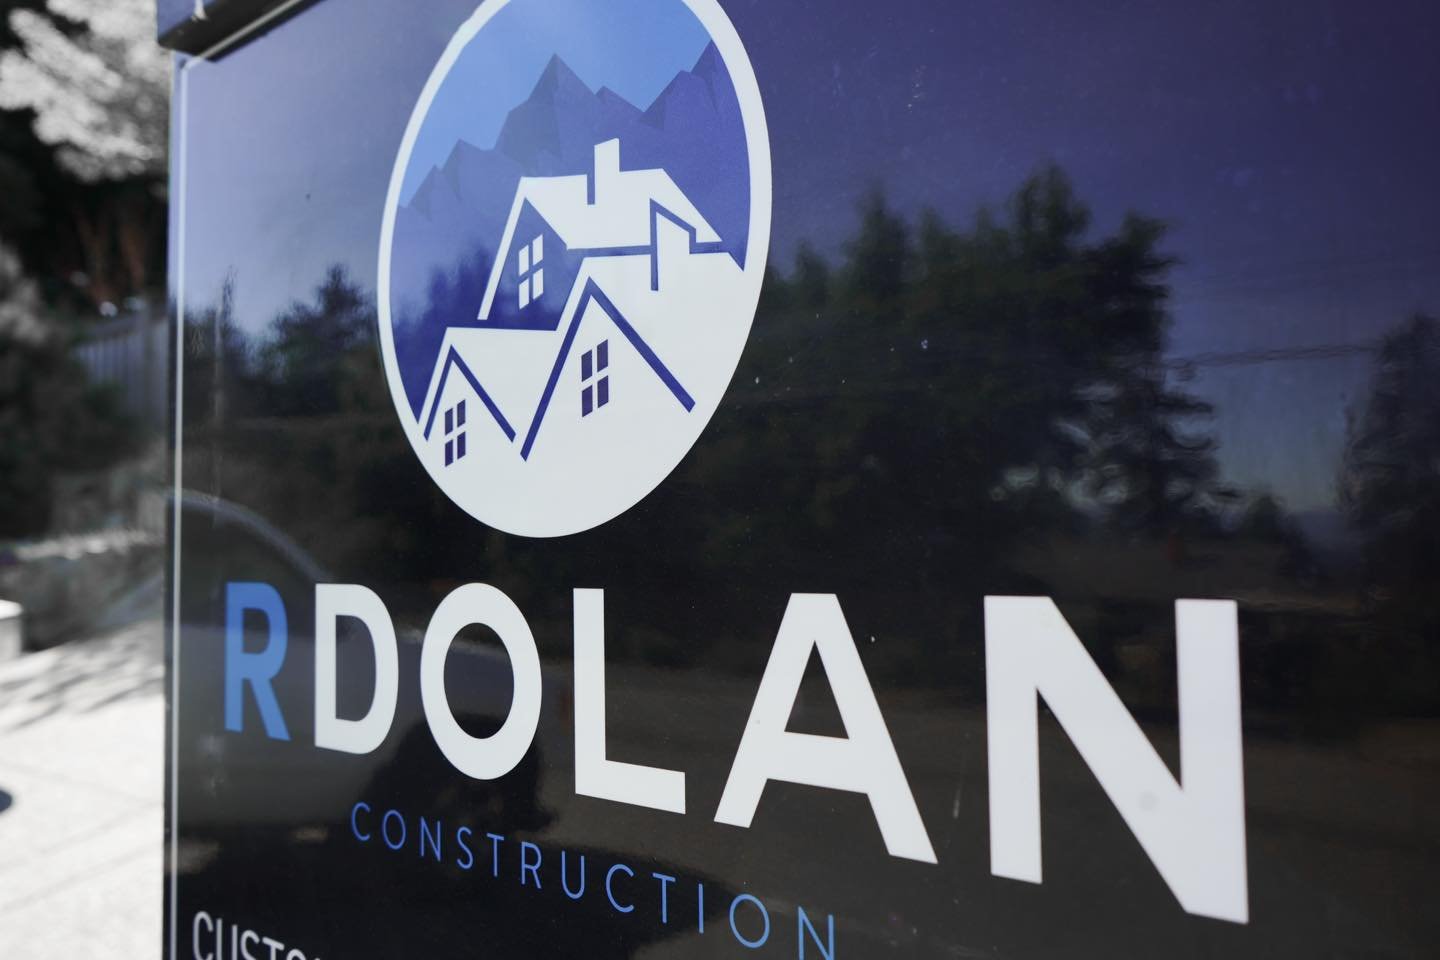 With over four decades of experience, an unwavering commitment to honest communication and top-notch workmanship R Dolan Construction is your first choice for custom homes on Vancouver Island. 

Plans for a custom home, renovation, or the addition of